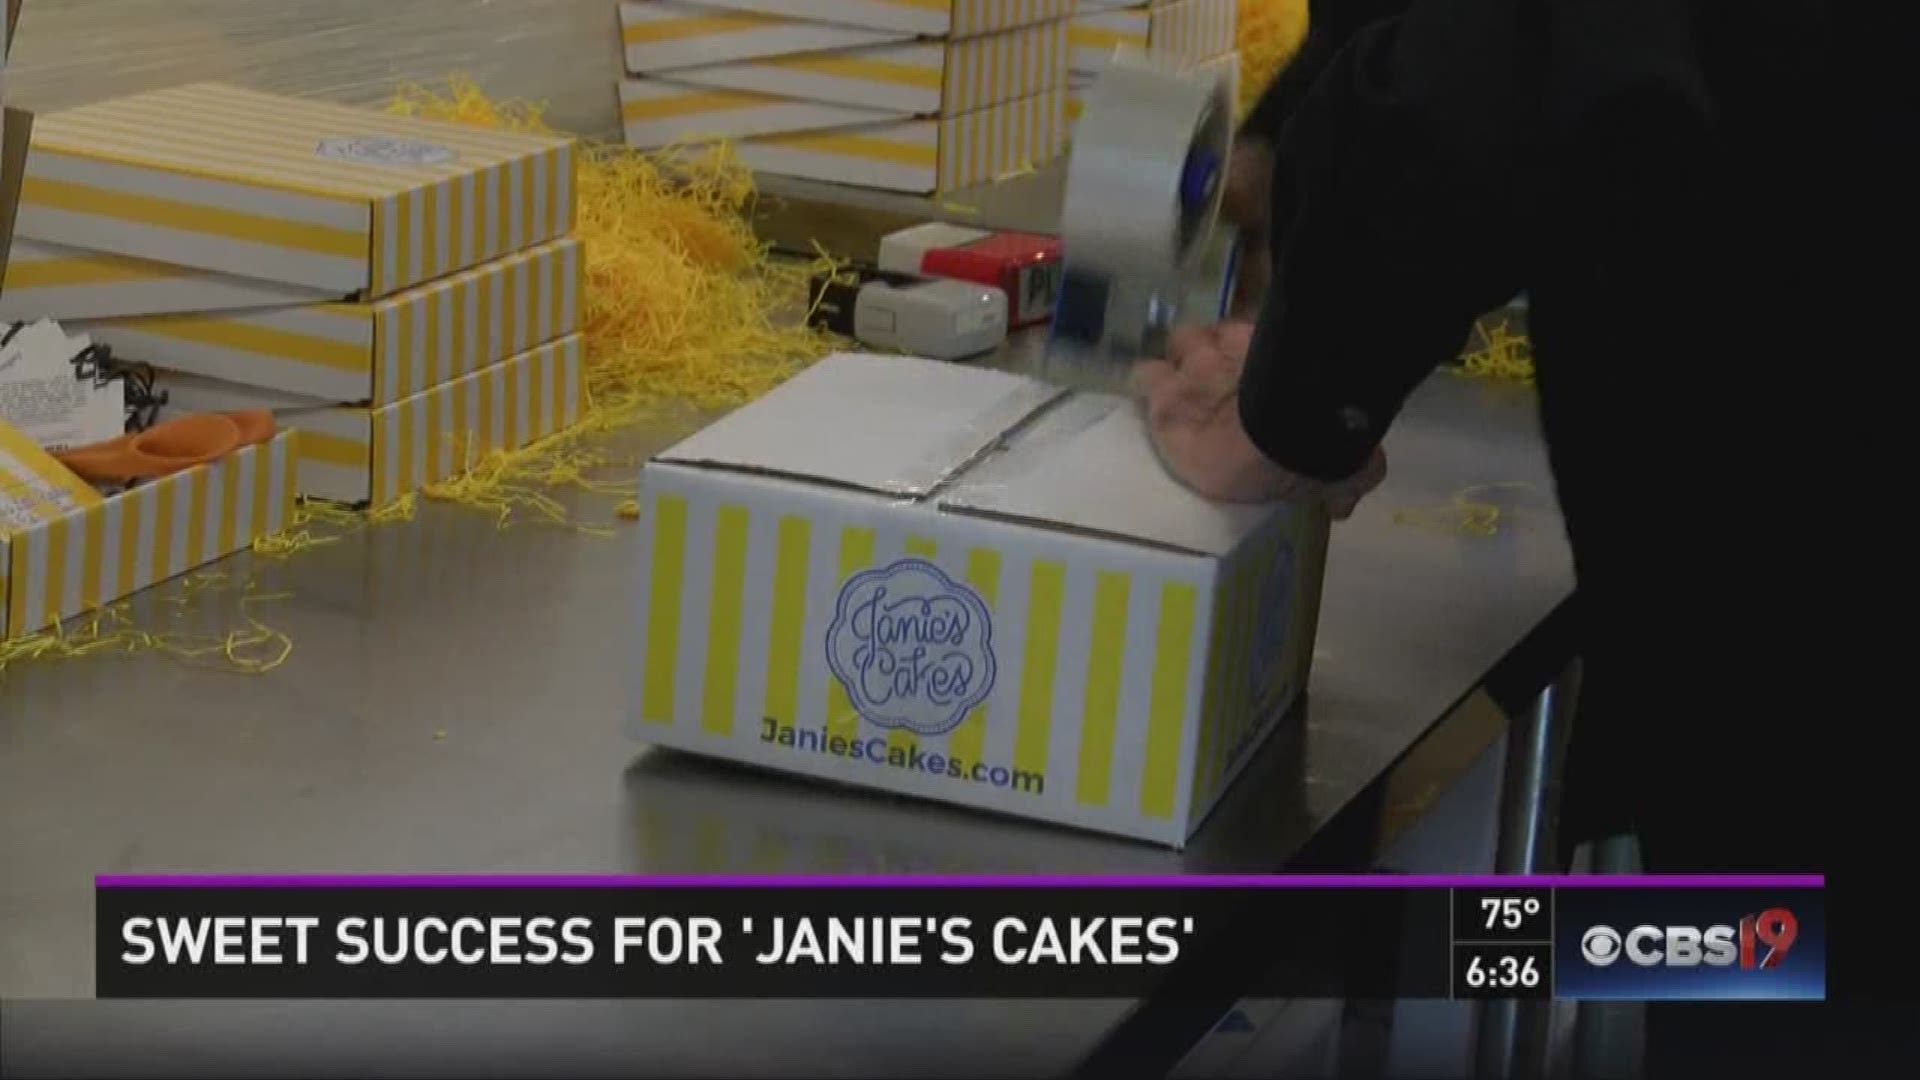 Janie's Cakes made Oprah's "Favorite Things" list for 2016.